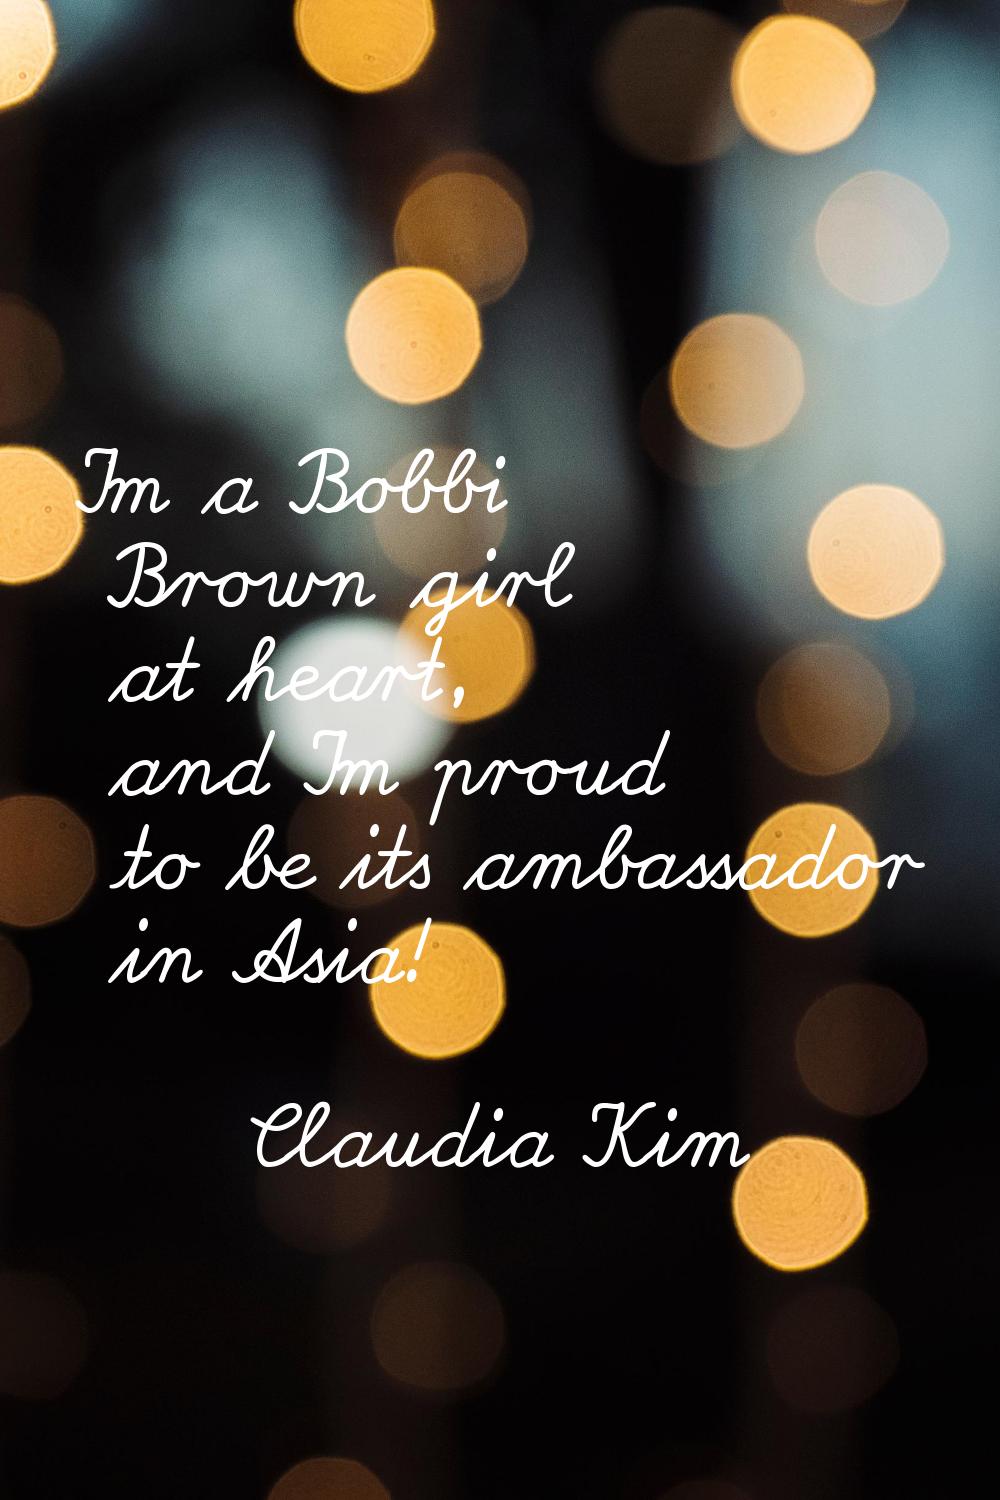 I'm a Bobbi Brown girl at heart, and I'm proud to be its ambassador in Asia!